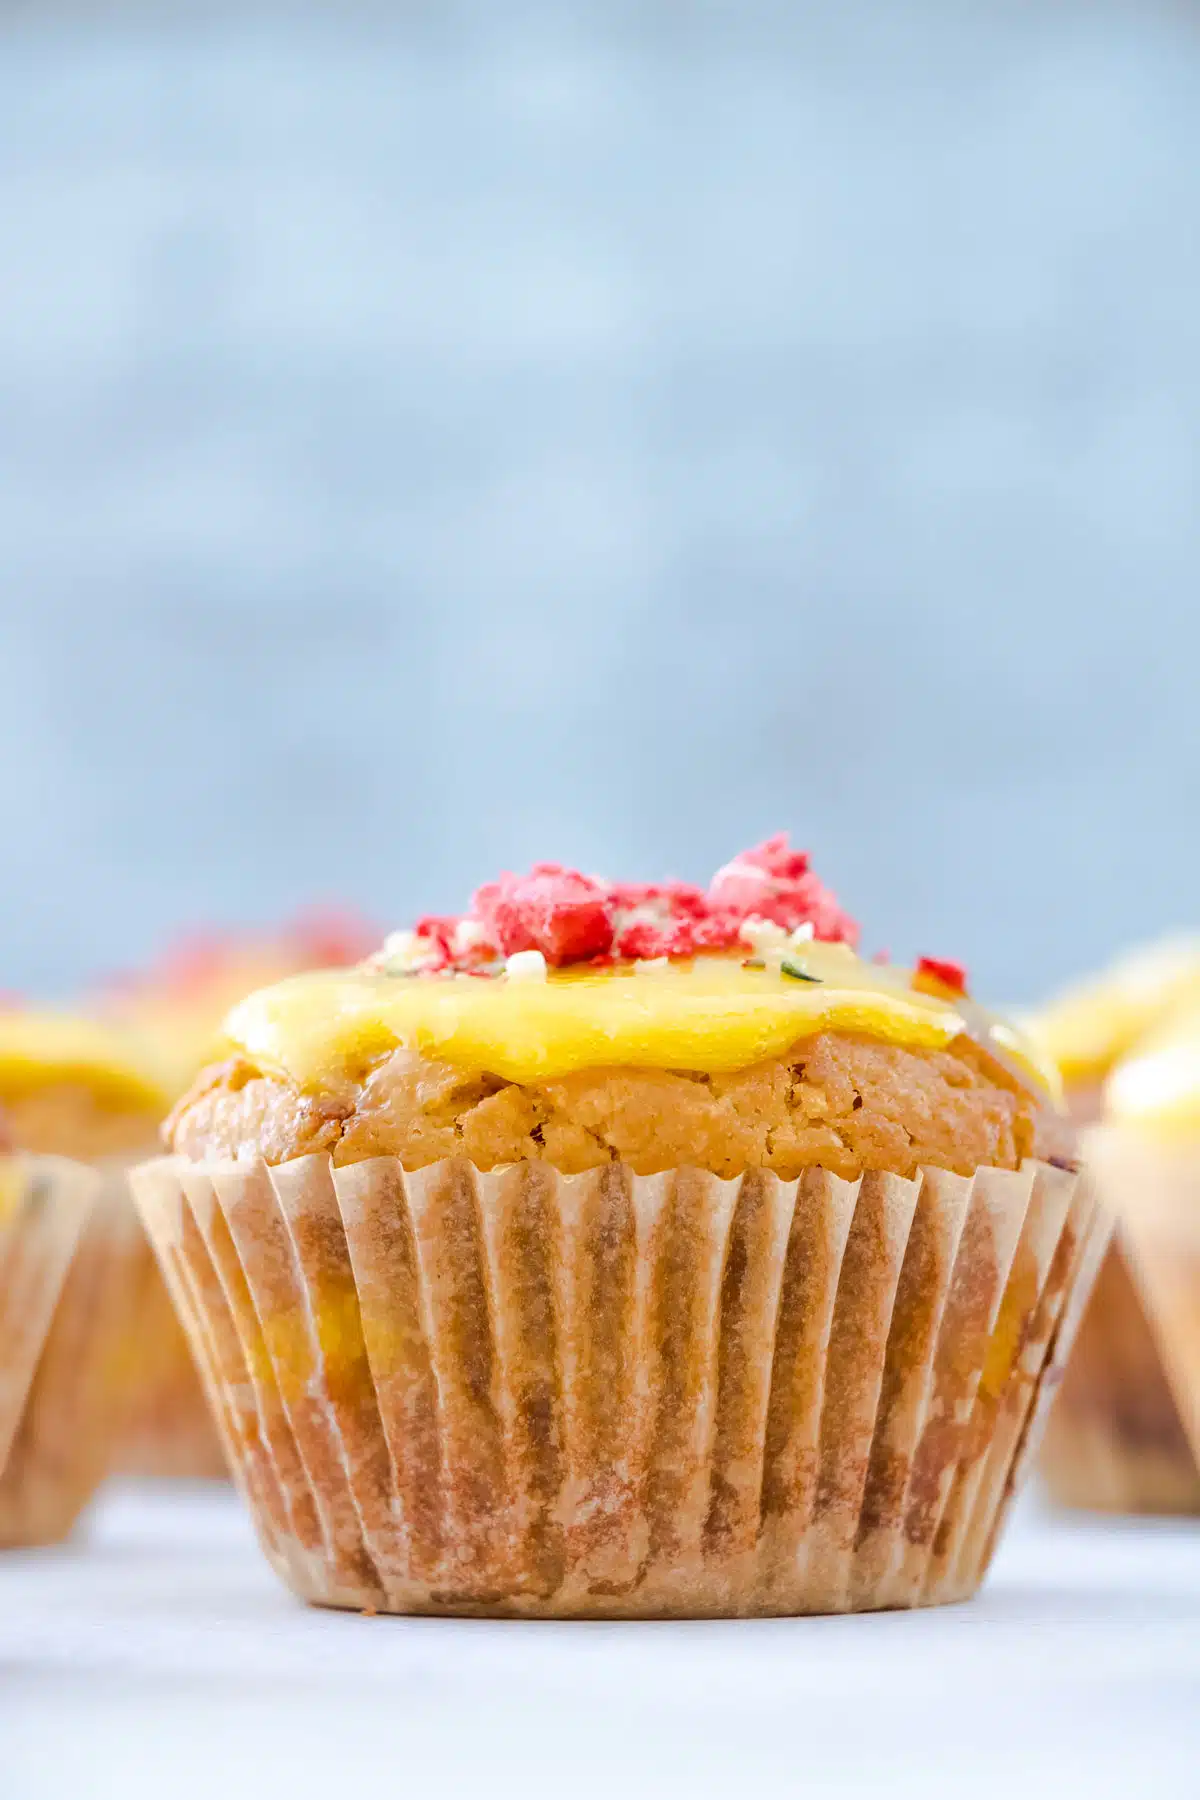 A lemon curd muffin topped with more curd and freeze dried strawberries is at the centre of the image. Other muffins are surrounding it on the table but these are out of focus.